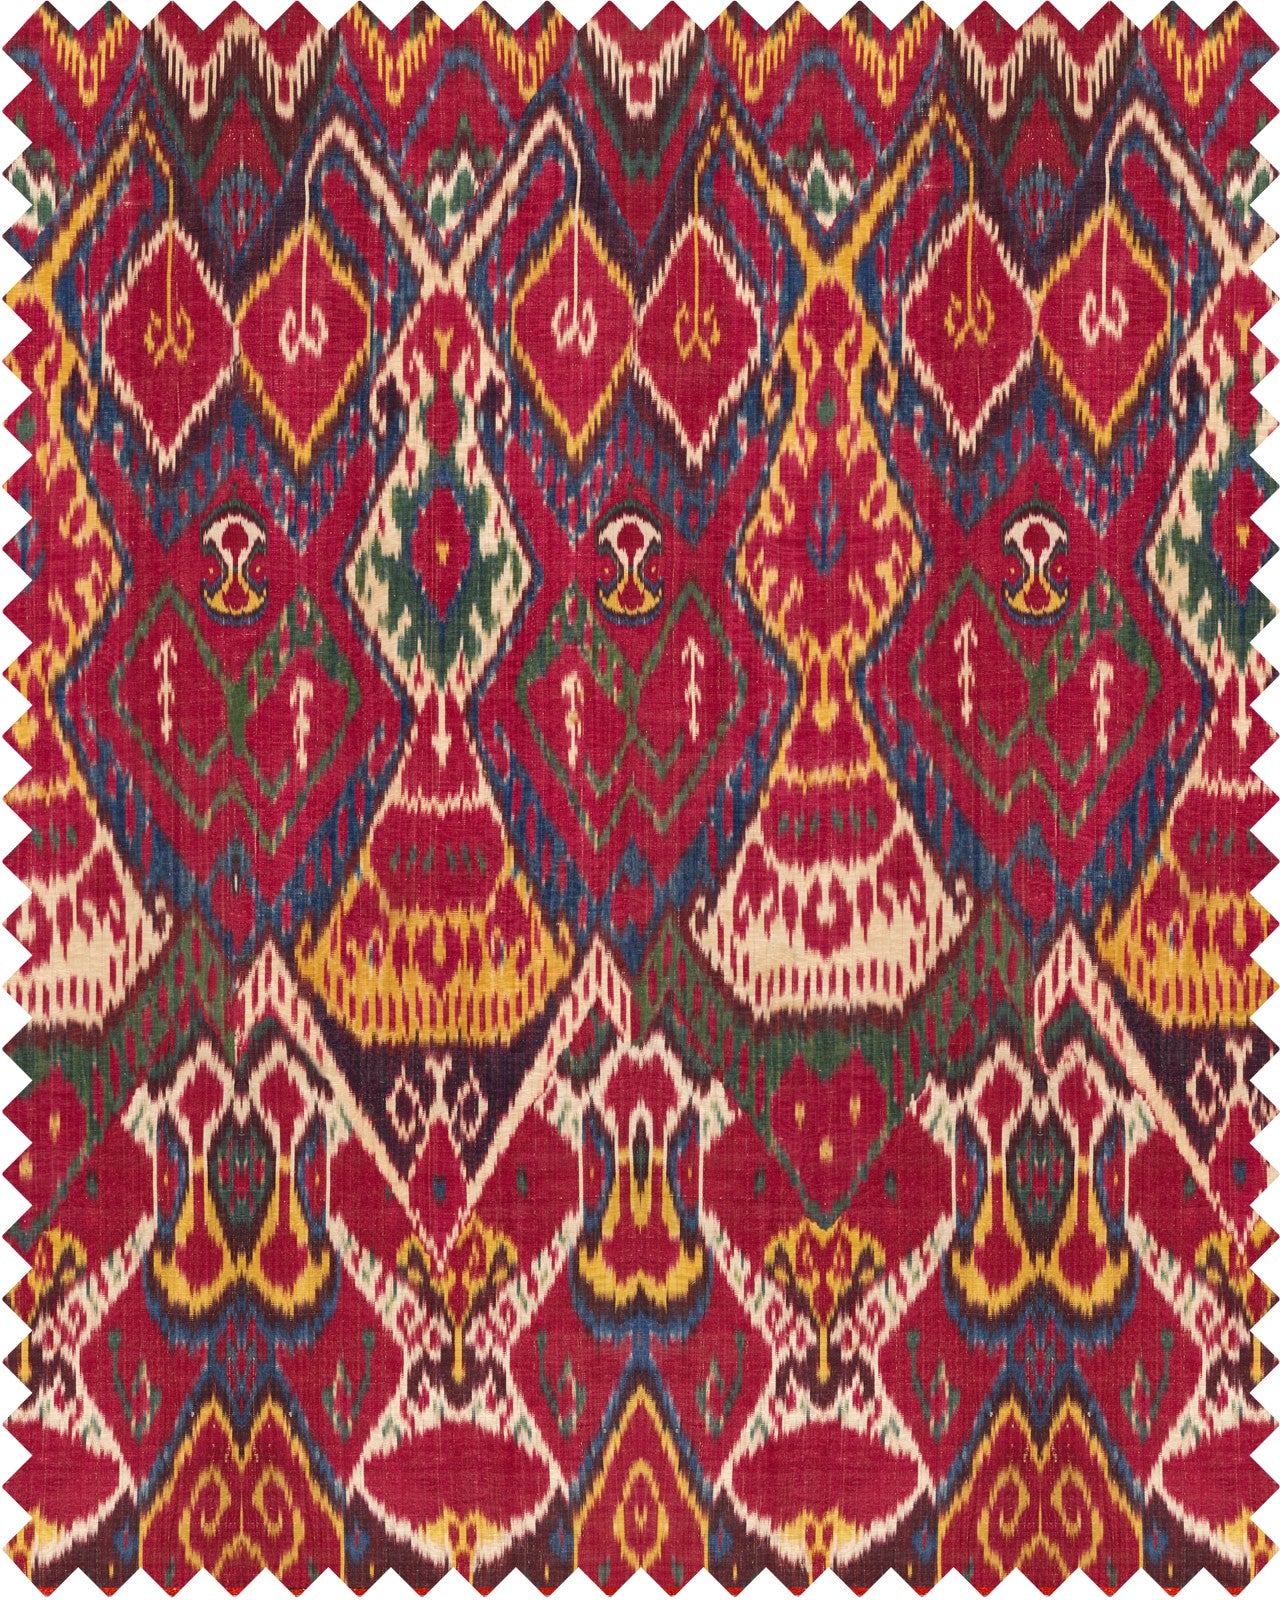 Uzbek Ikat fabric in red yellow blue brown color - pattern number FB00024 - by Mind The Gap in the Home of an Eccentric Man collection